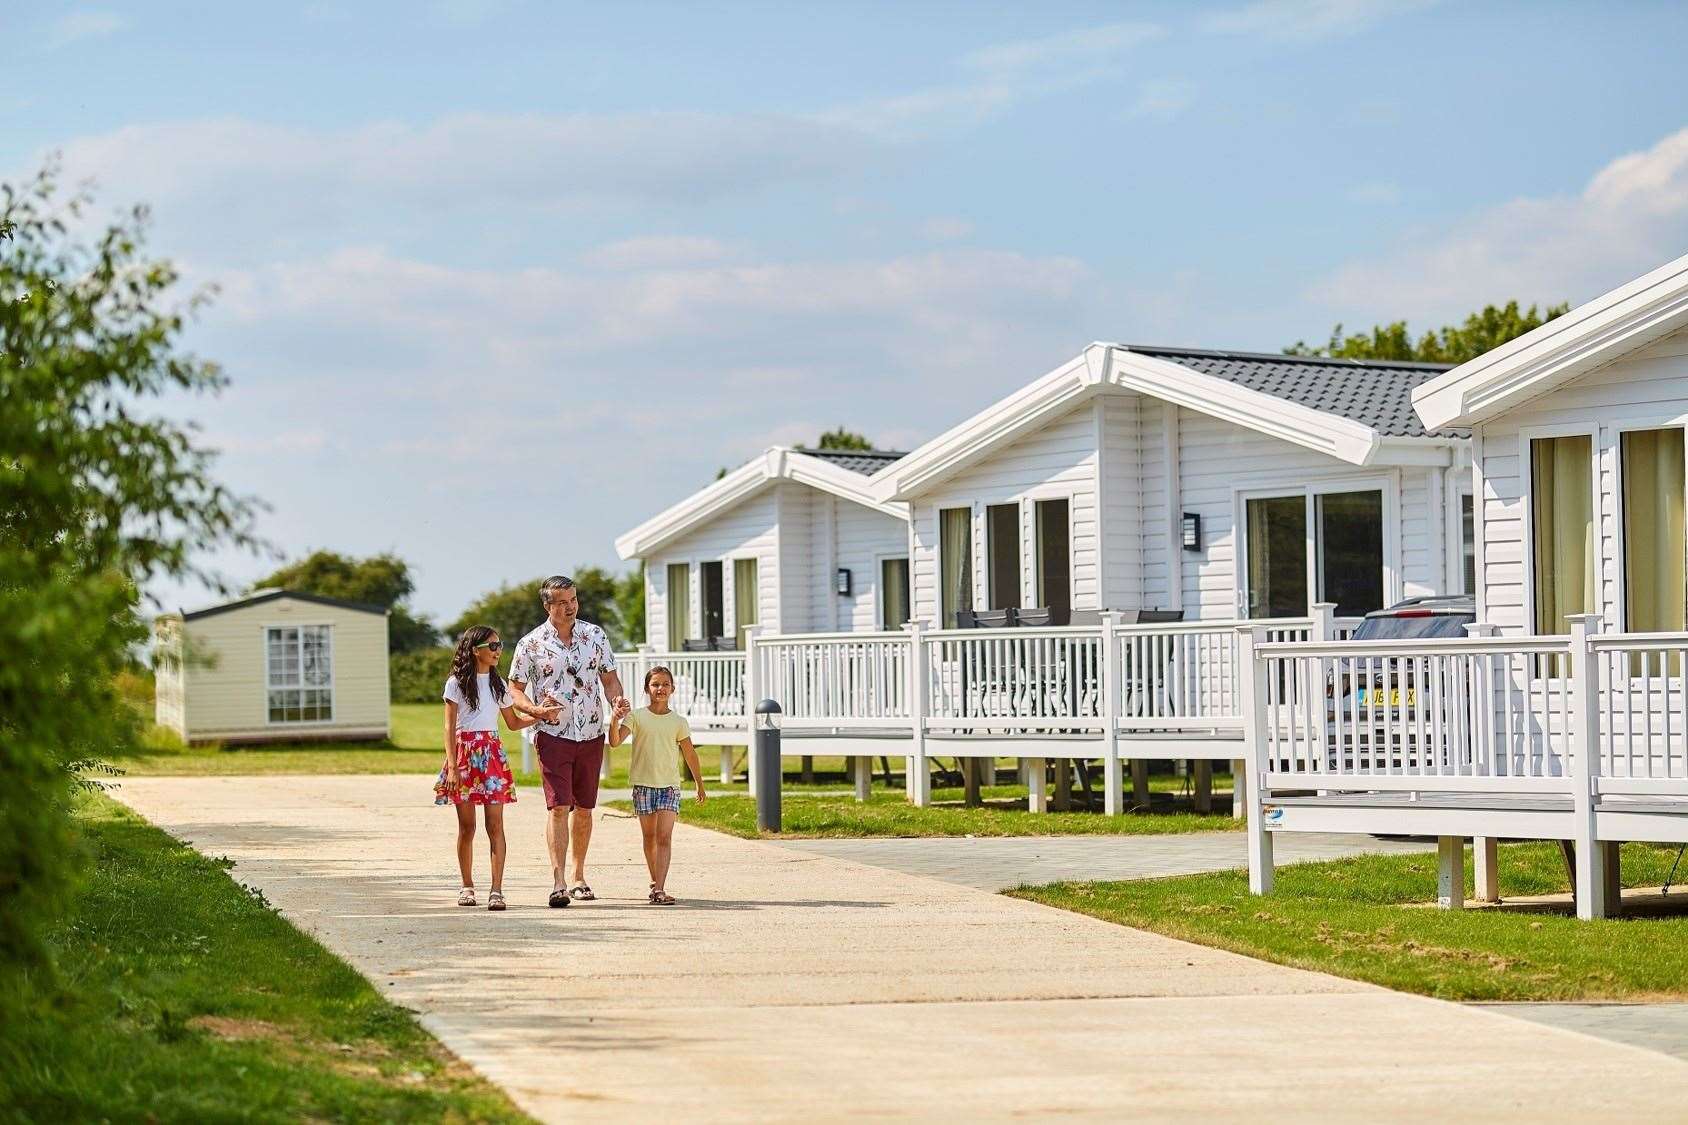 St Margaret’s Bay Holiday Park is one of two in Kent that have shut. Picture: Parkdean Resorts